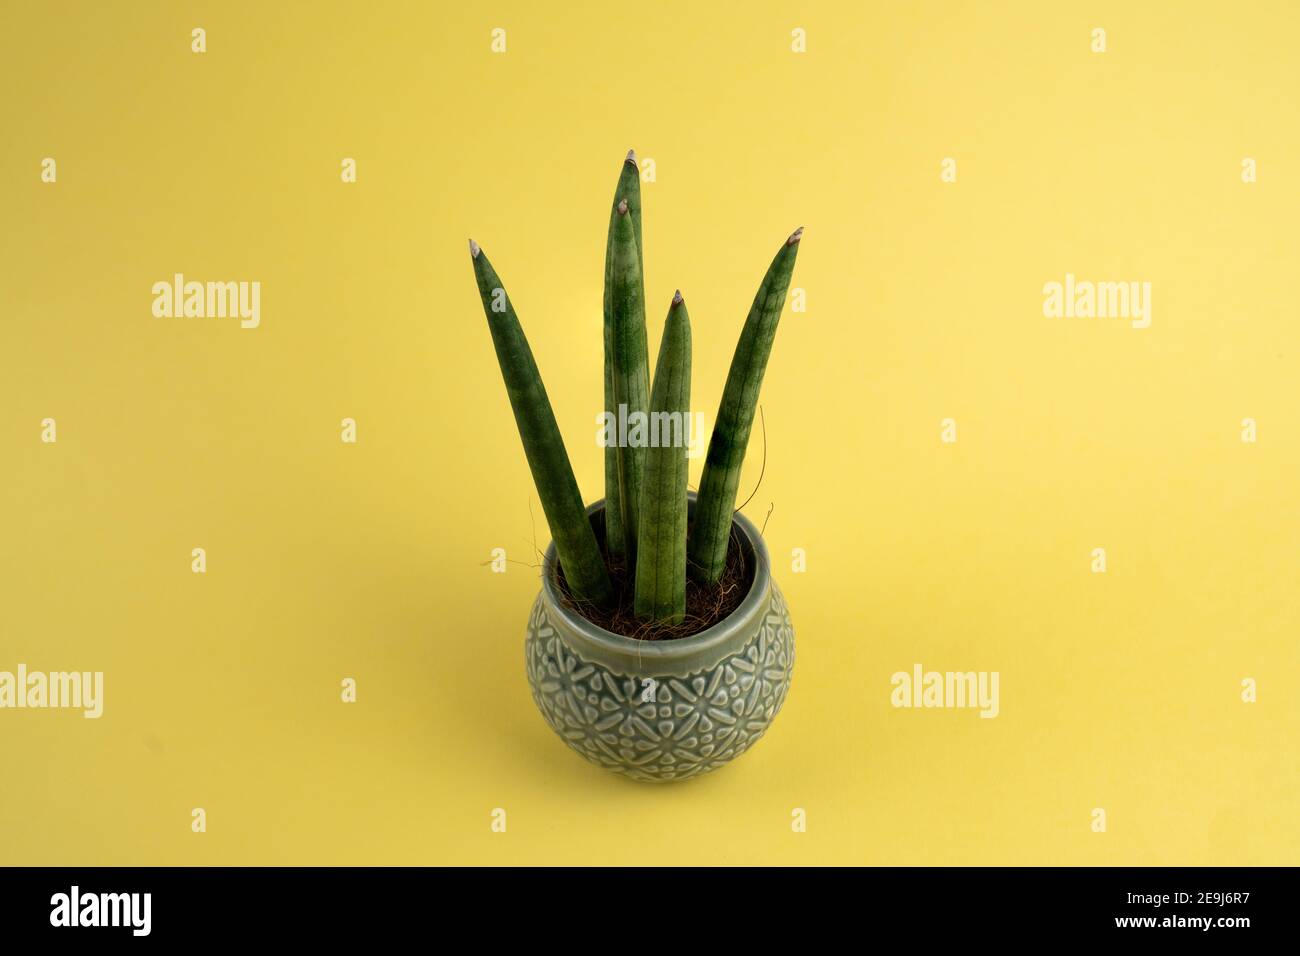 sansevieria cylindrica in pot with yellow background, top view Stock Photo